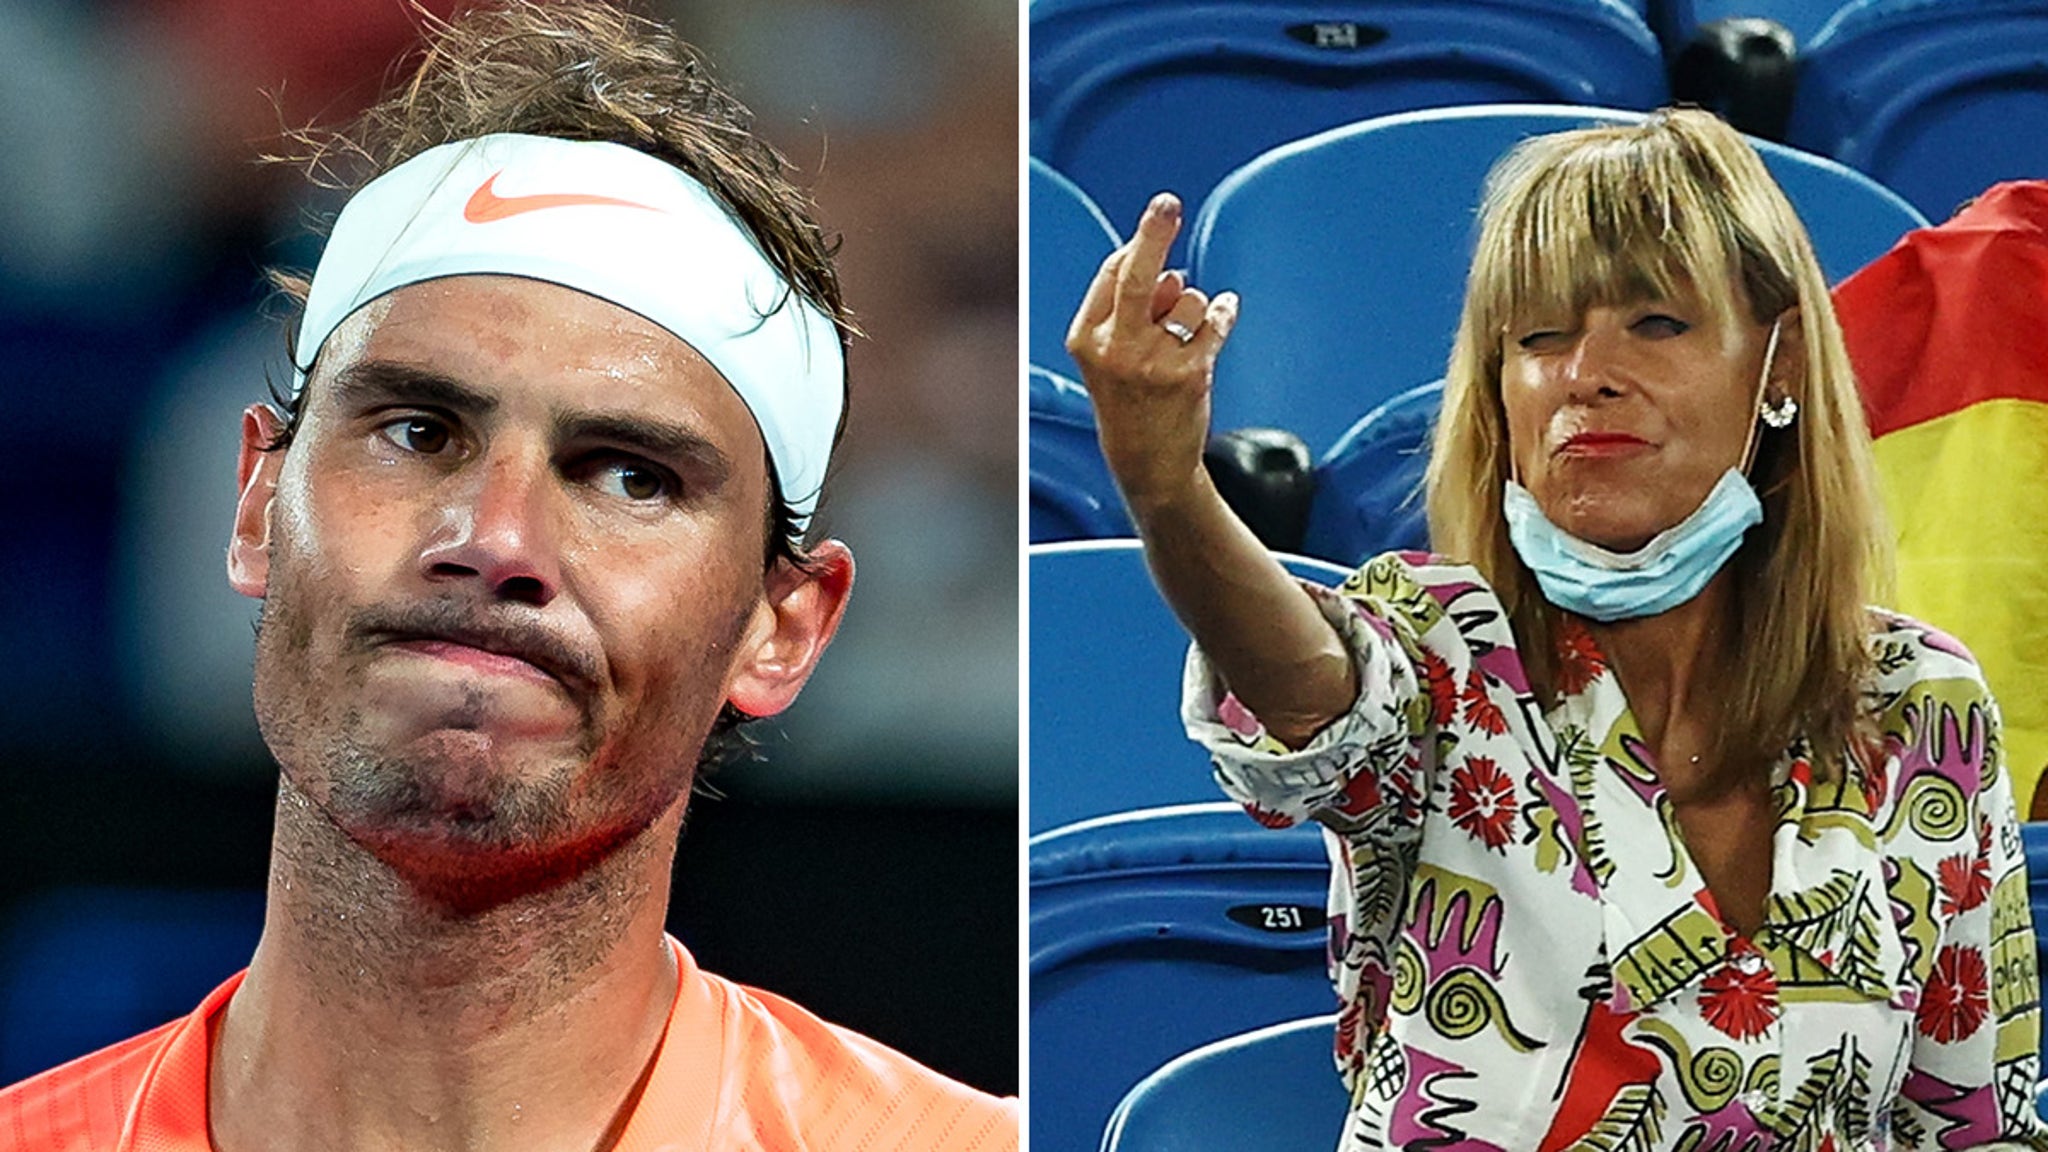 Rafael Nadal Heckler kicked at the Australian Open, hit his middle finger on a tennis star!